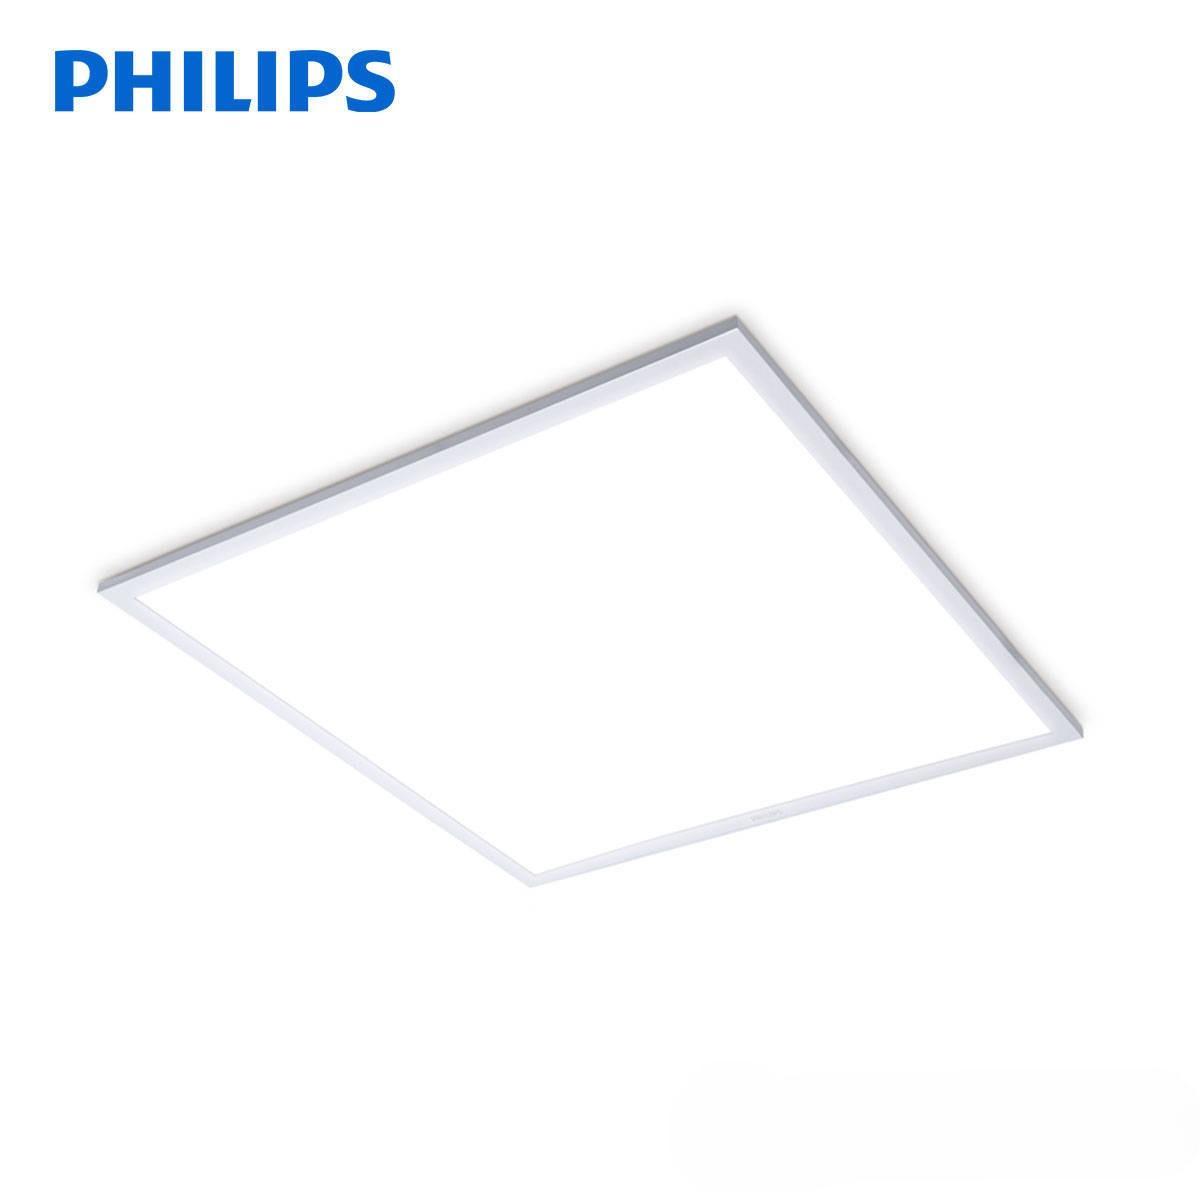 A white square light fixtureDescription automatically generated